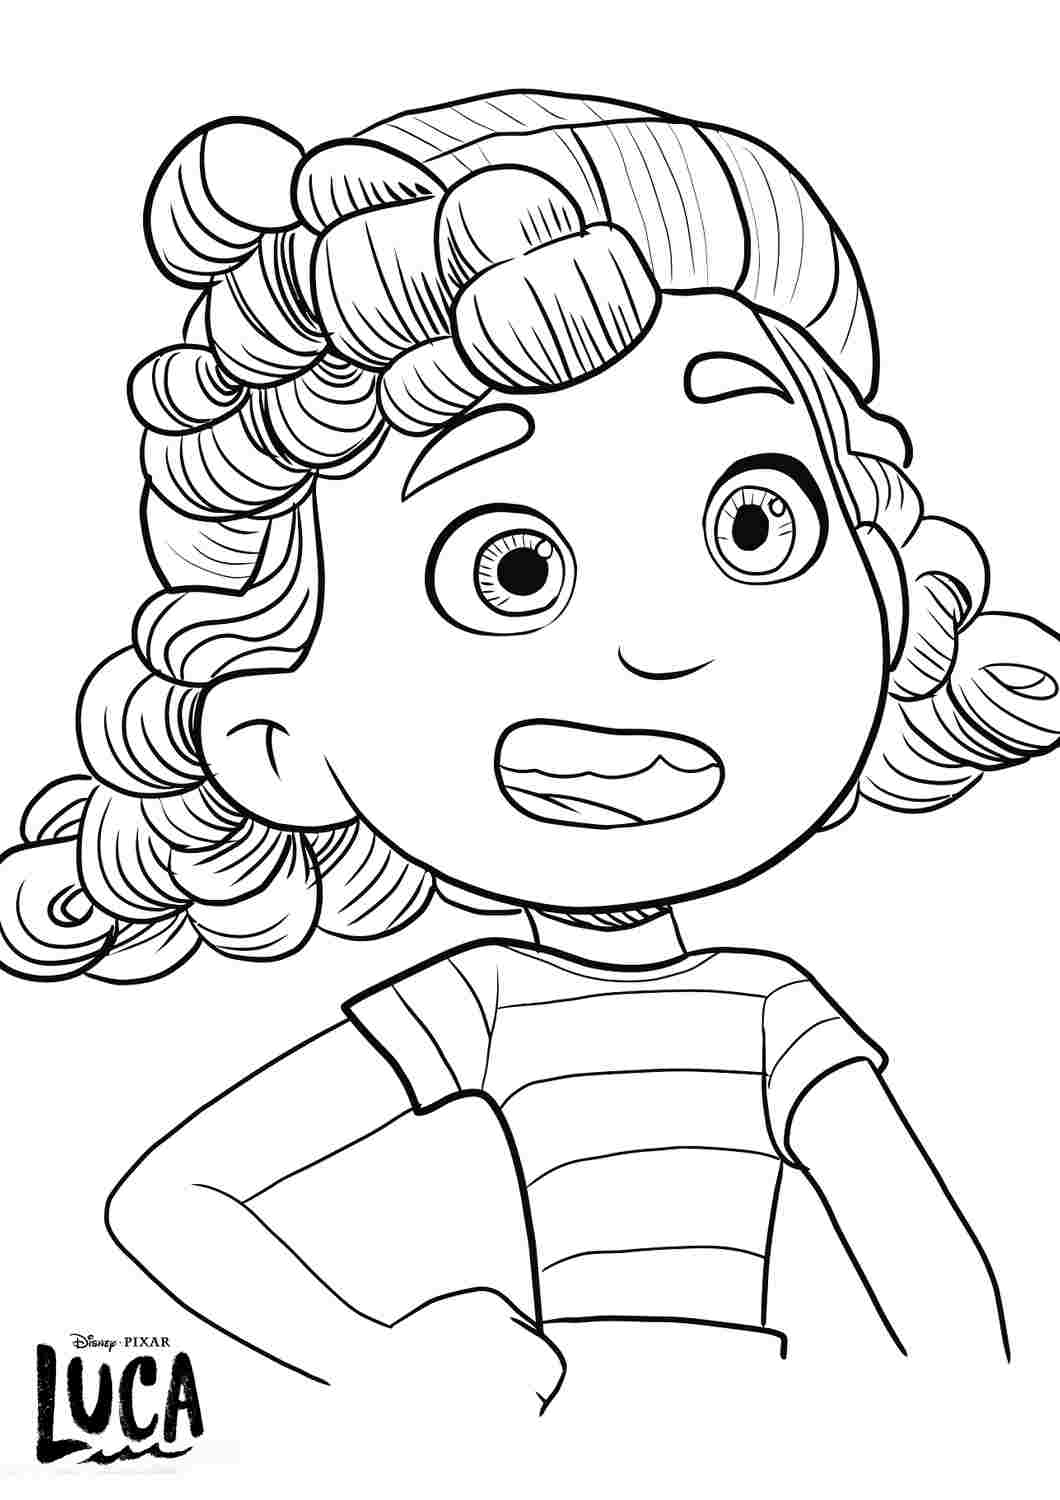 Luca girl coloring book for kids.jpg to print and online